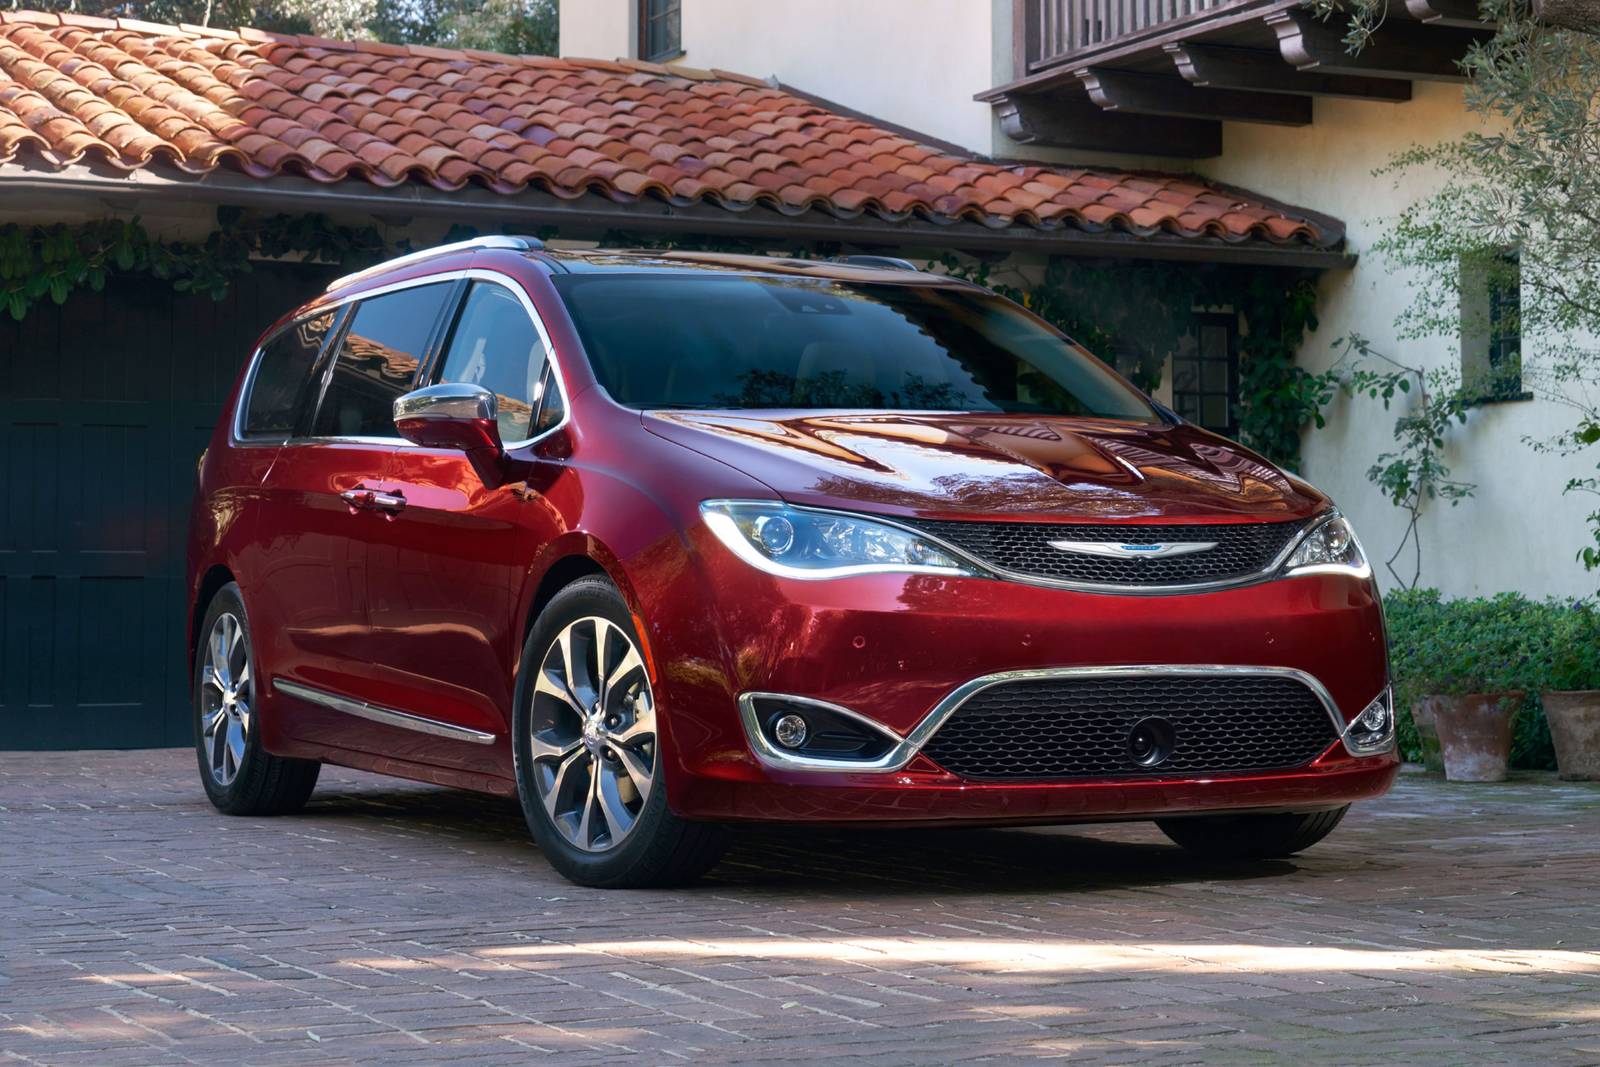 2018 Chrysler Pacifica Review & Ratings | Edmunds